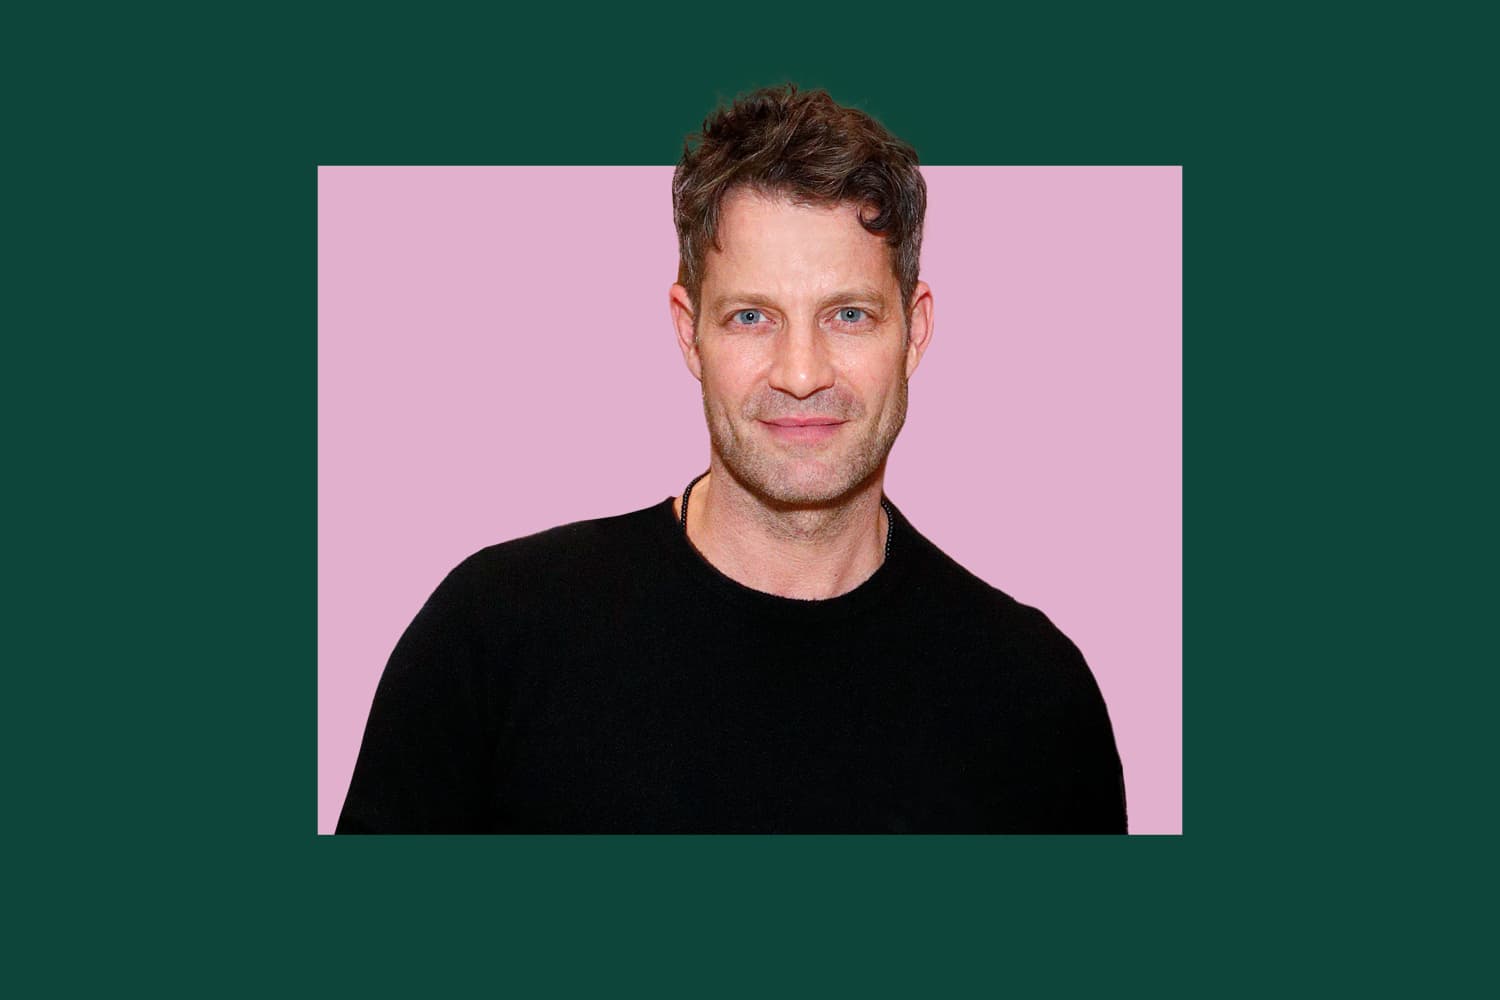 Here’s Why Nate Berkus Says You Should Shop Secondhand First